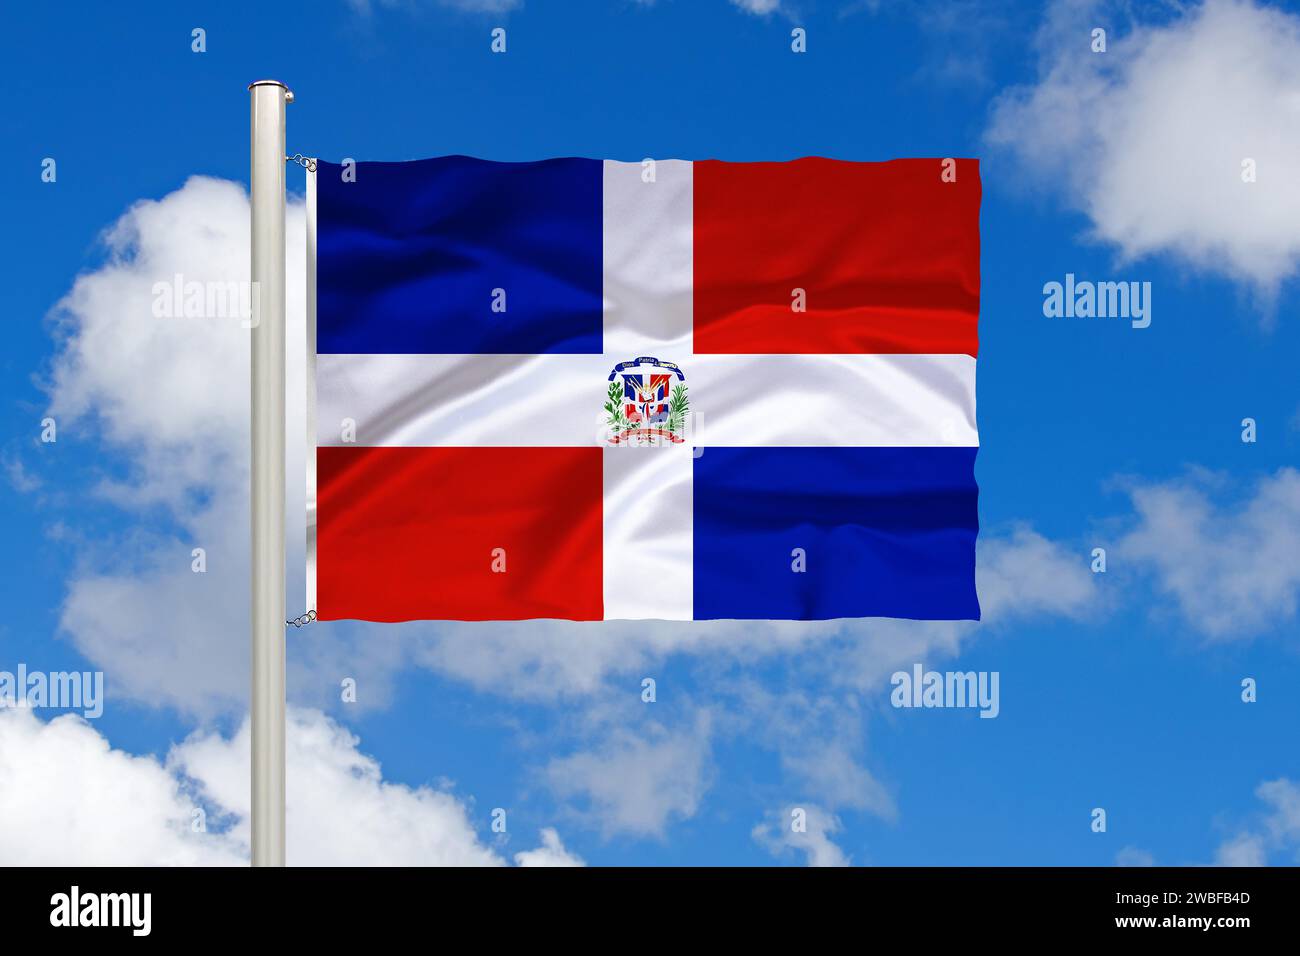 National flag of the Dominican Republic, island of Hispaniola, in front of cumulus clouds and blue sky, studio Stock Photo